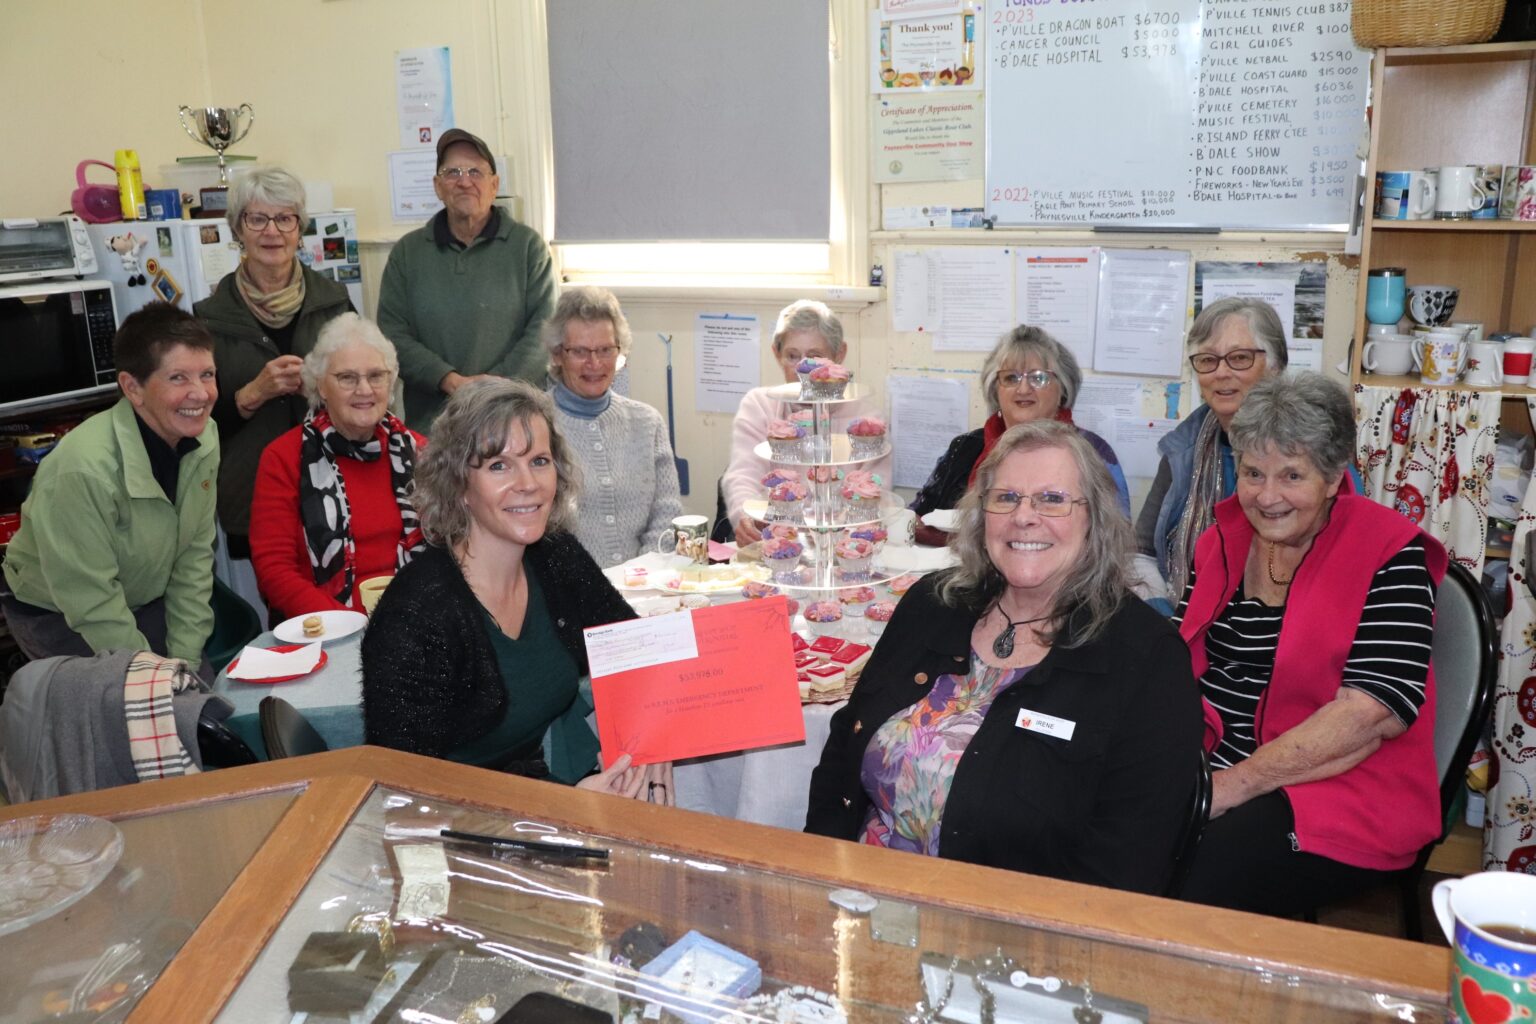 Eleven people gather around a table that has cakes and slices for an afternoon tea. One of the people is holding a cheque to donate to Bairnsdale Regional Health Service.